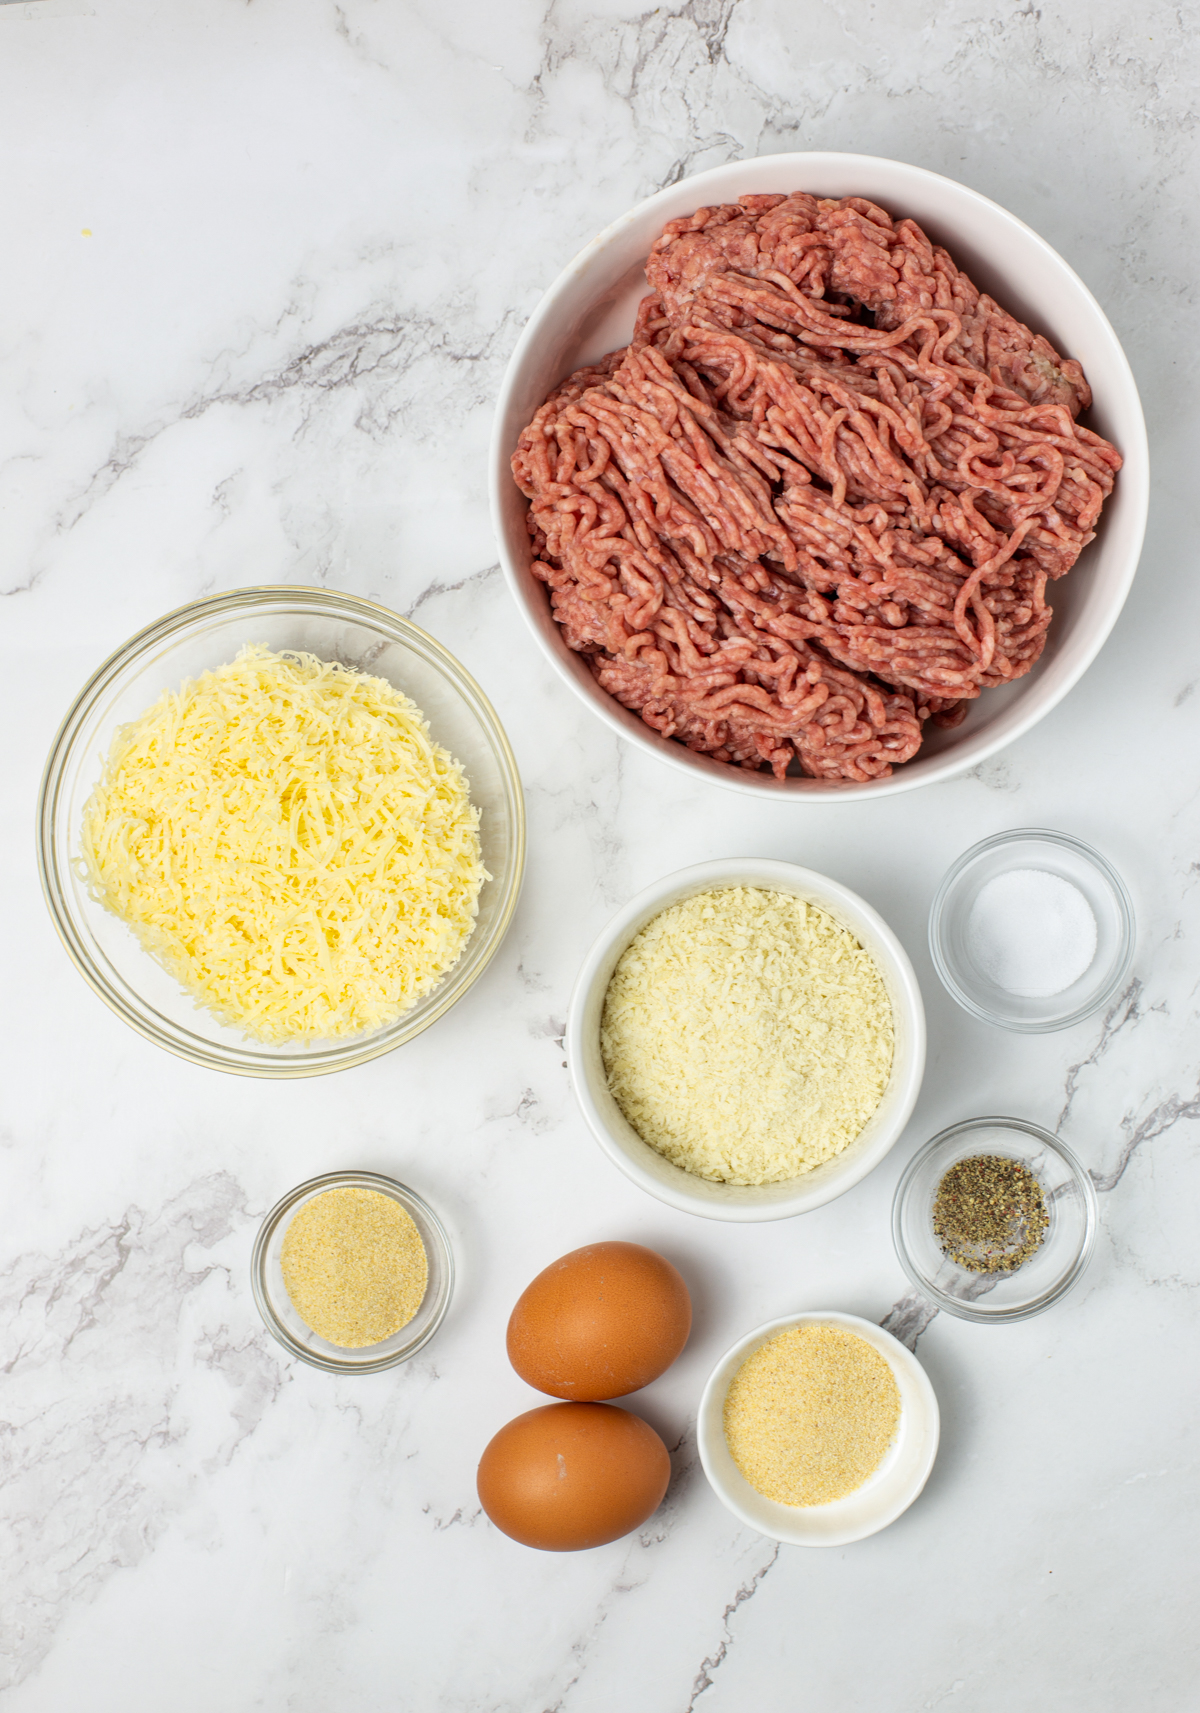 Ingredients needed to make Homemade Meatballs